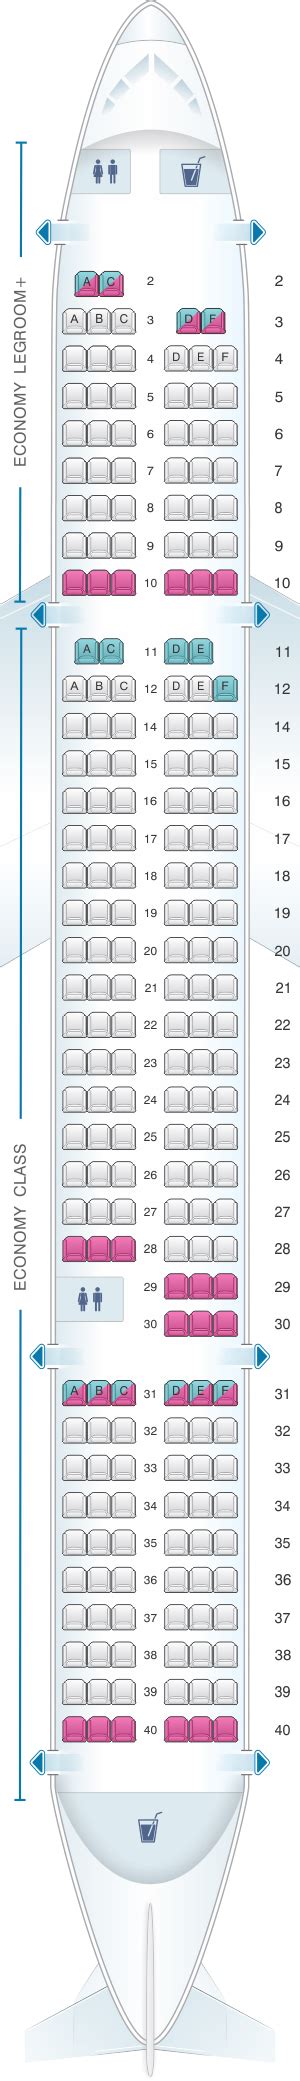 Seating chart allegiant airlines. Seat Maps Airlines Allegiant Air Airbus A320 Allegiant Air Airbus A320 Seat Maps Allegiant Air Allegiant Air operates only one model of Airbus, A320-200. As of 2022, the company has 79 A320-200 planes. The airline chose the aircraft for its reliability, power, and ease of operation. 